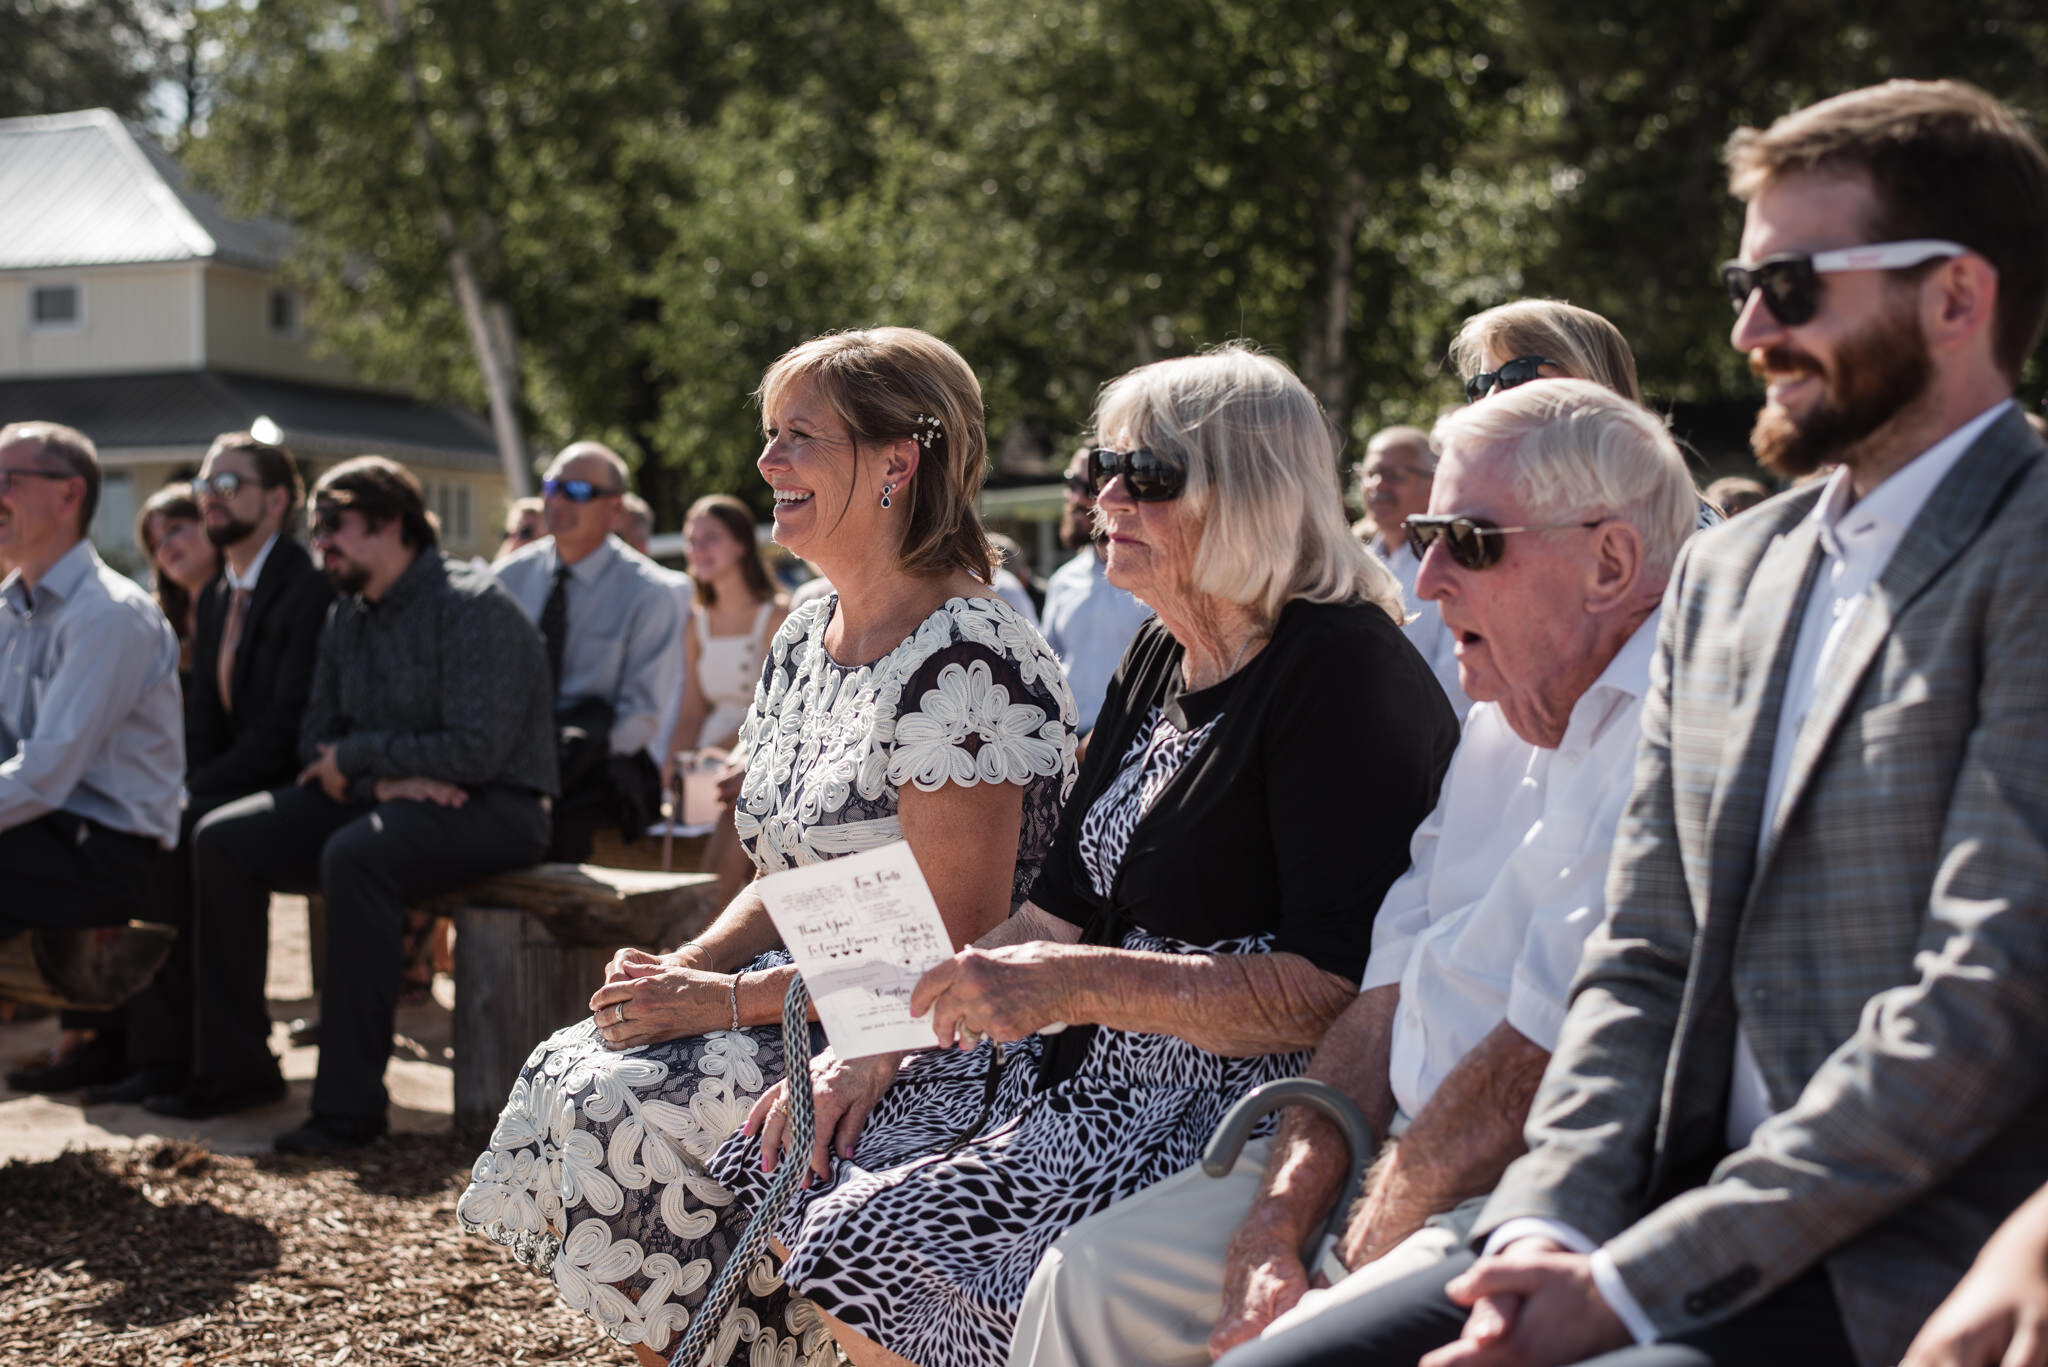 611-guests-reactions-wedding-outdoor-lake-ceremony-cottage-ontario-toronto.jpg